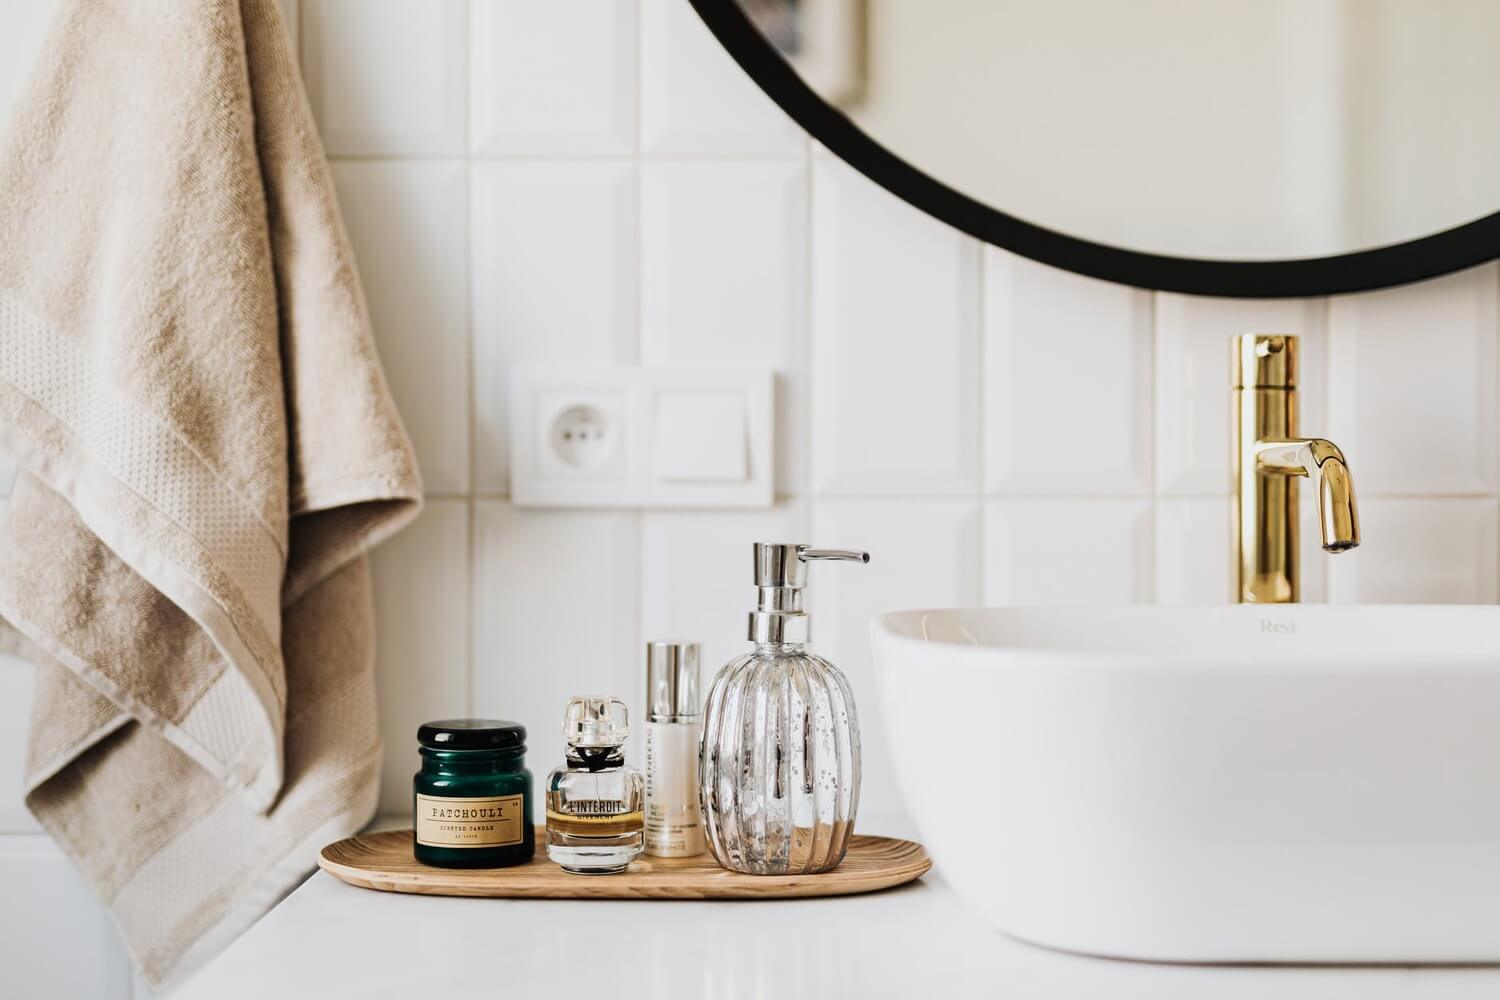 6 Signs That You Need to Remodel Your Bathroom Soon